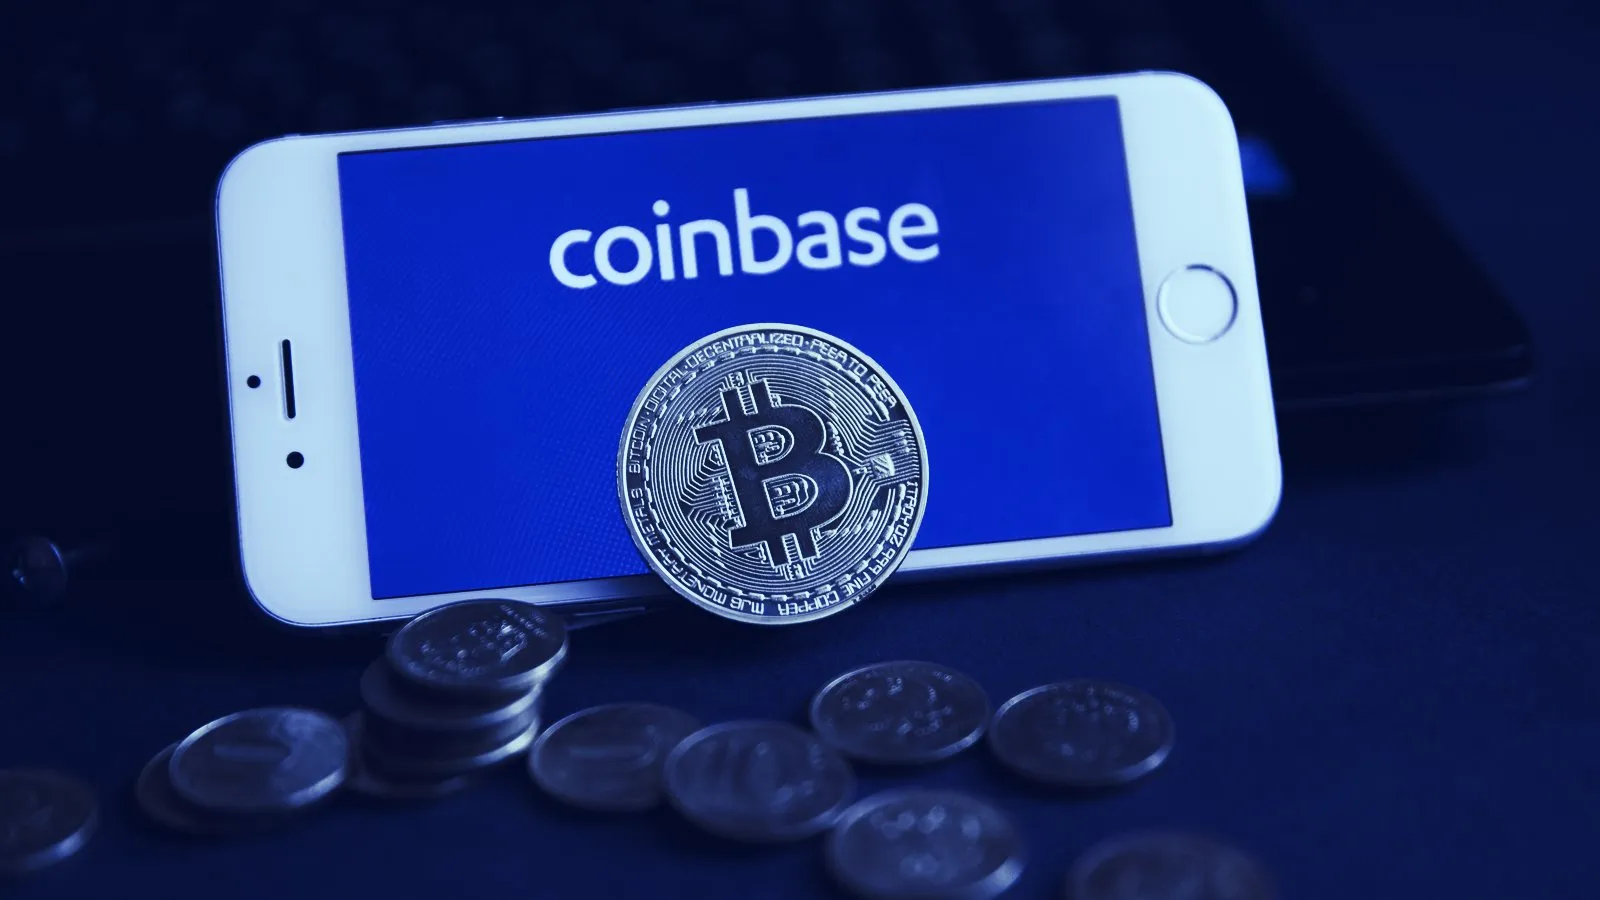 Coinbase has 35 million users. Image: Shutterstock